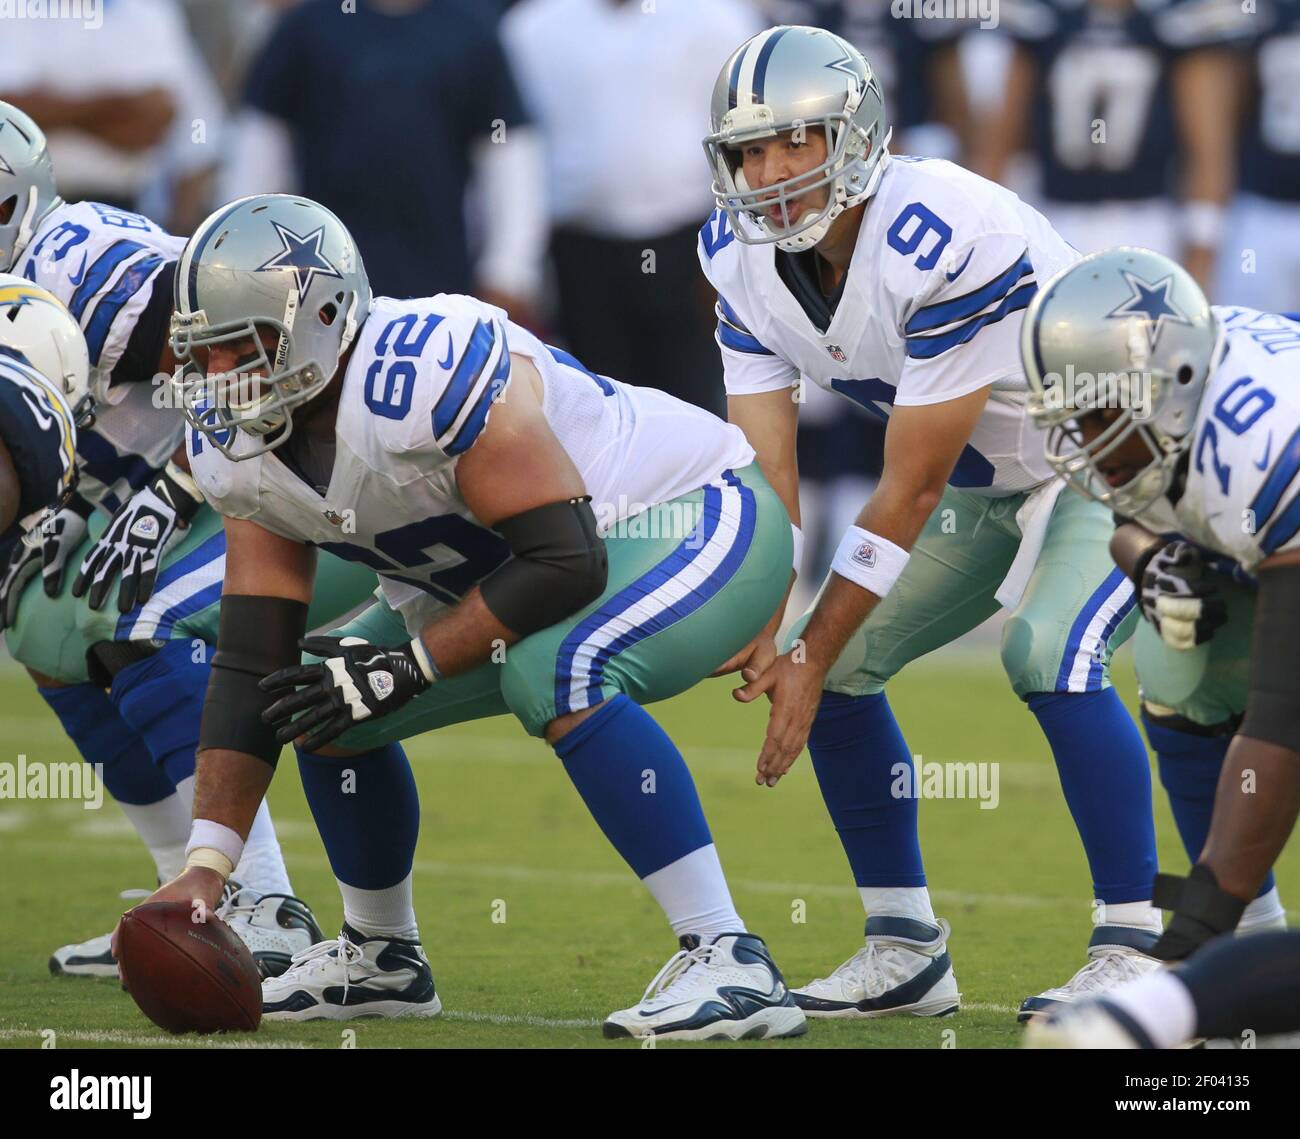 Dallas Cowboys quarterback Tony Romo (9) prepares to take the snap from  center David Arkin (62) against the San Diego Chargers in NFL preseason  action at Qualcomm Stadium in San Diego, California,